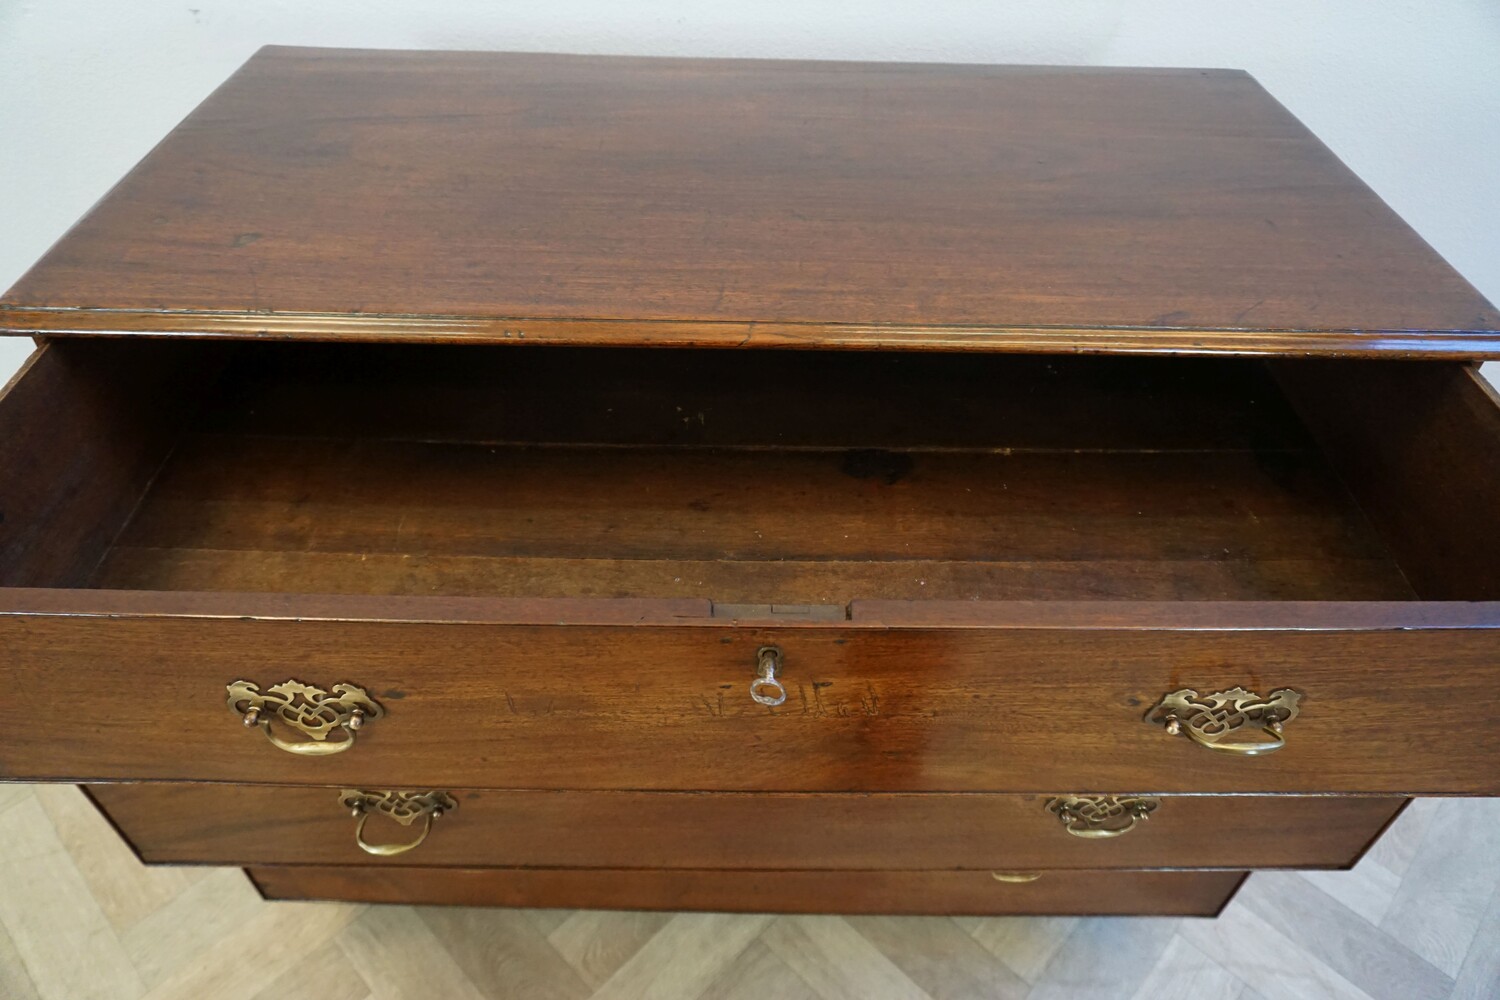 18th century mahogany chest of drawersSOLD